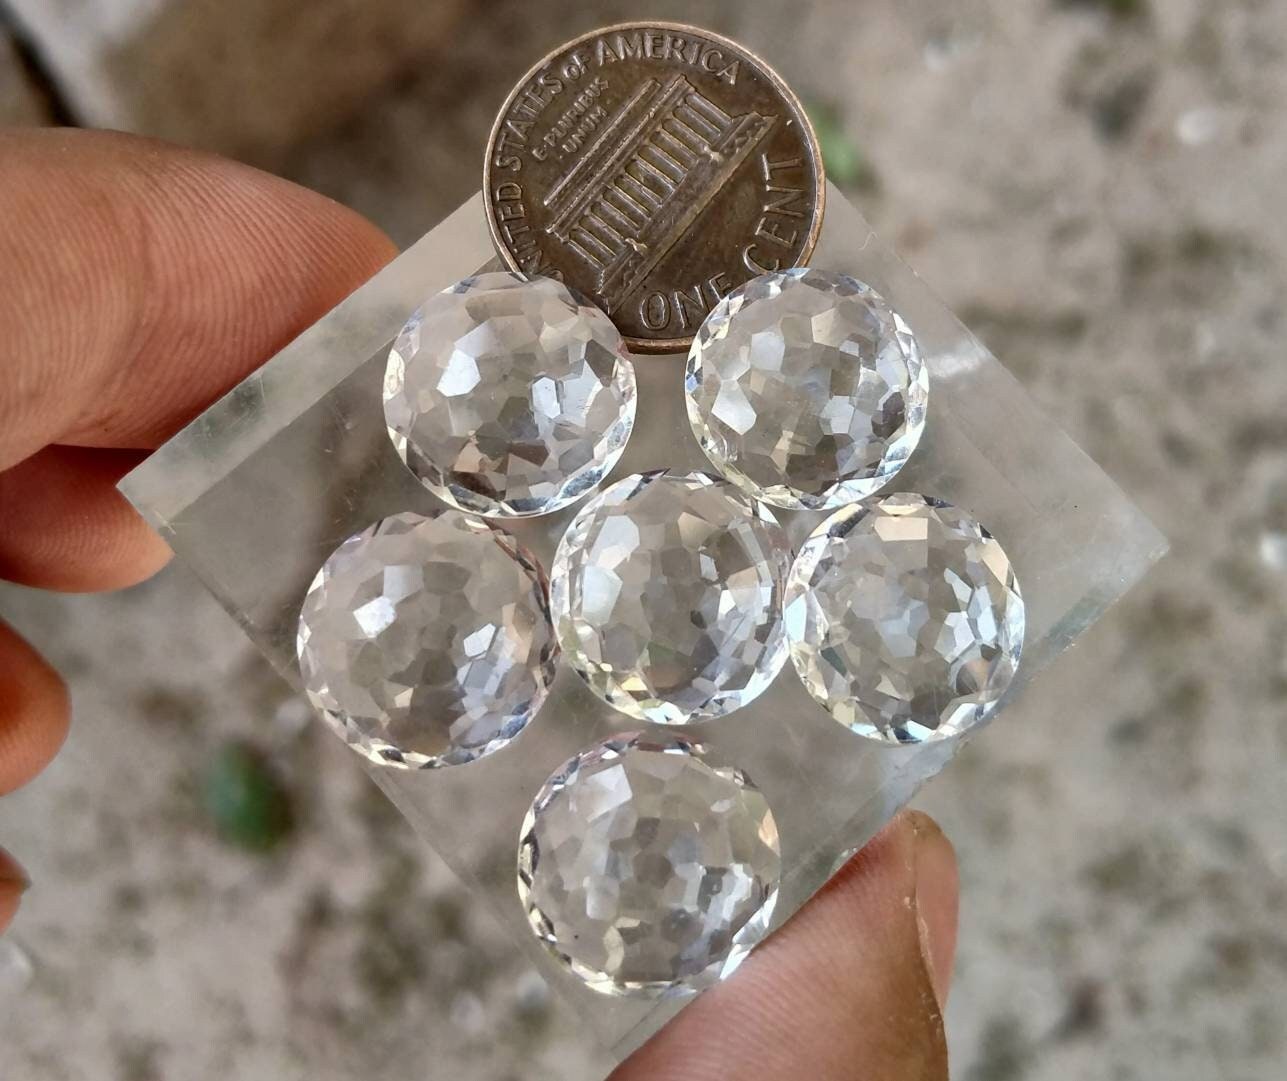 ARSAA GEMS AND MINERALSNatural good quality beautiful calibrated rose/cut faceted 27 carats quartz gems - Premium  from ARSAA GEMS AND MINERALS - Just $45.00! Shop now at ARSAA GEMS AND MINERALS